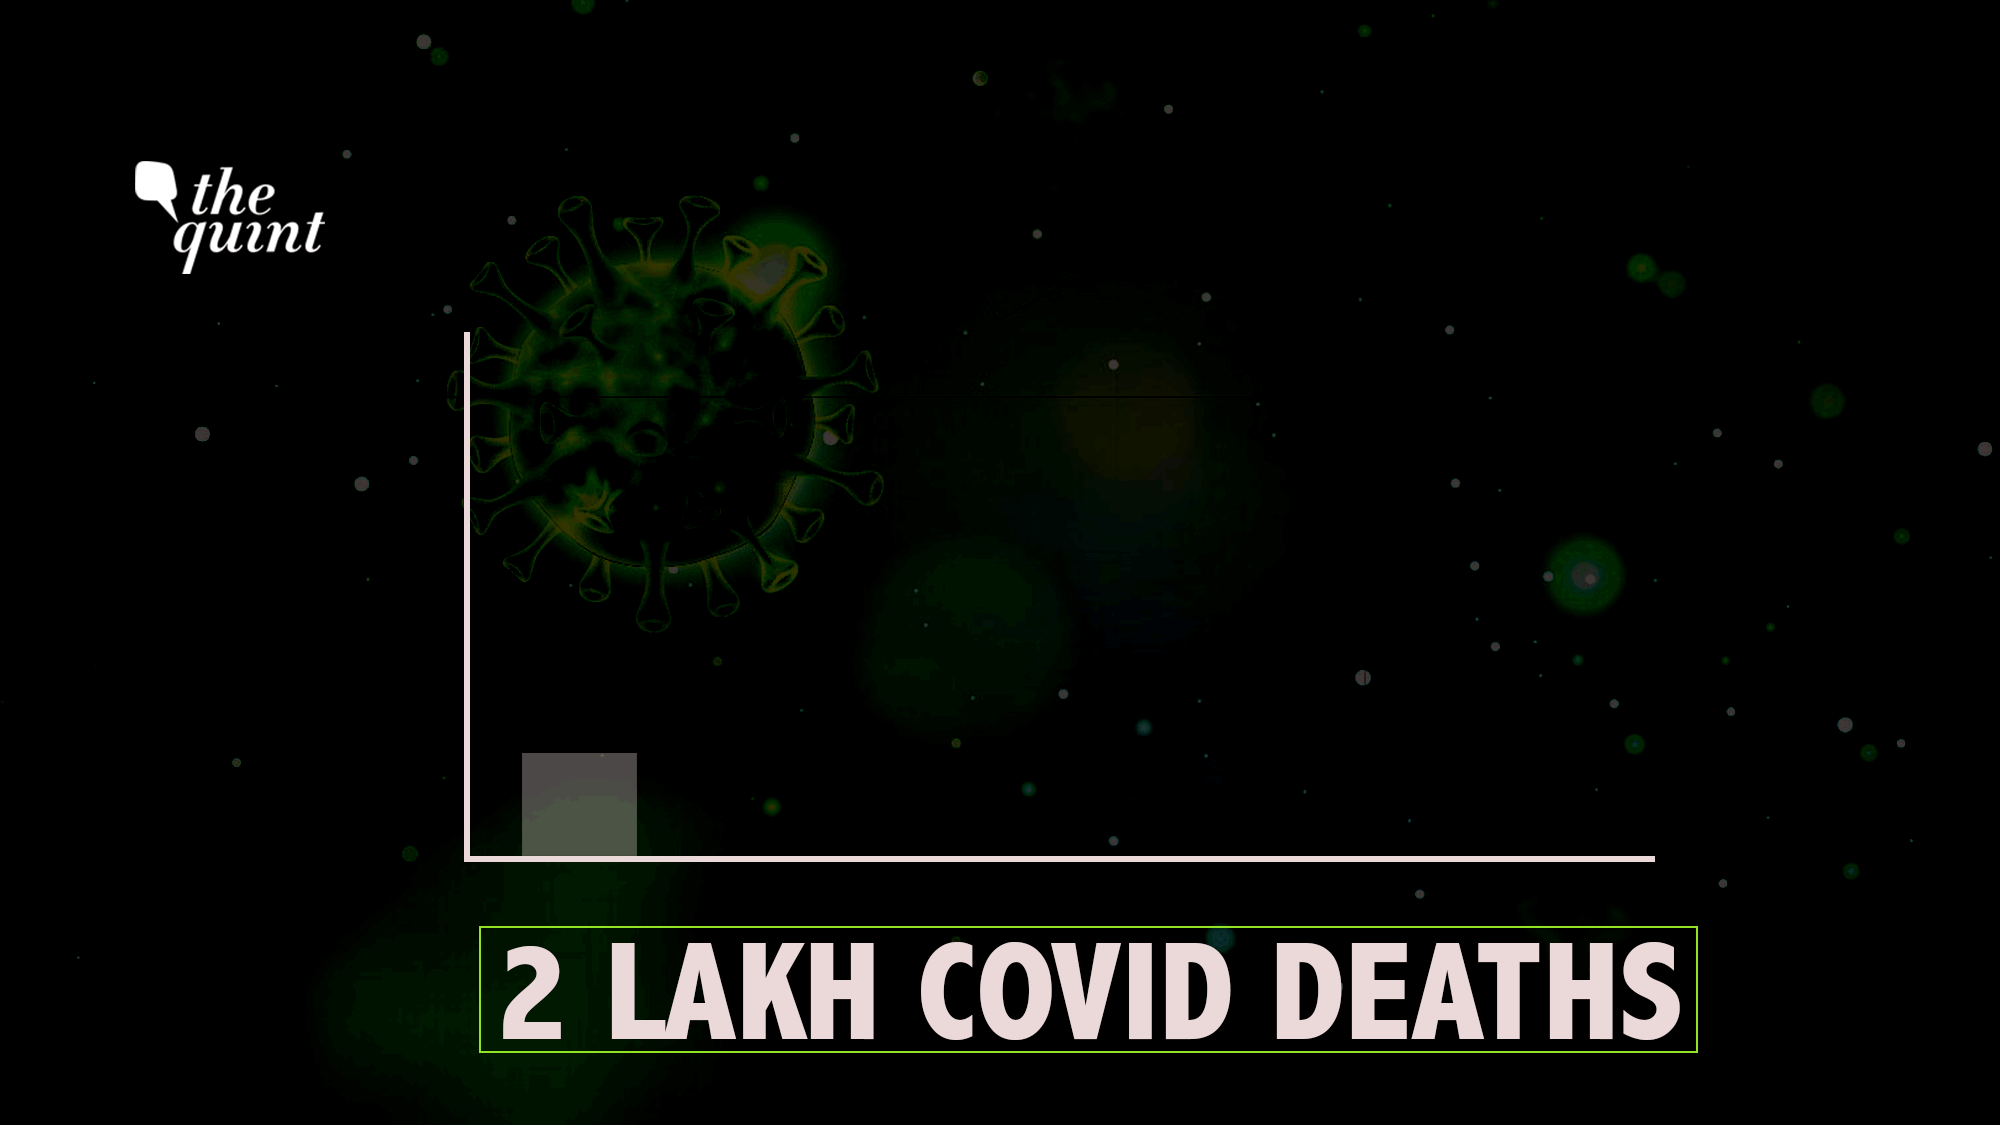 India  crossed the grim statistic of two lakh deaths caused by COVID-19 on Wednesday, 28 April.